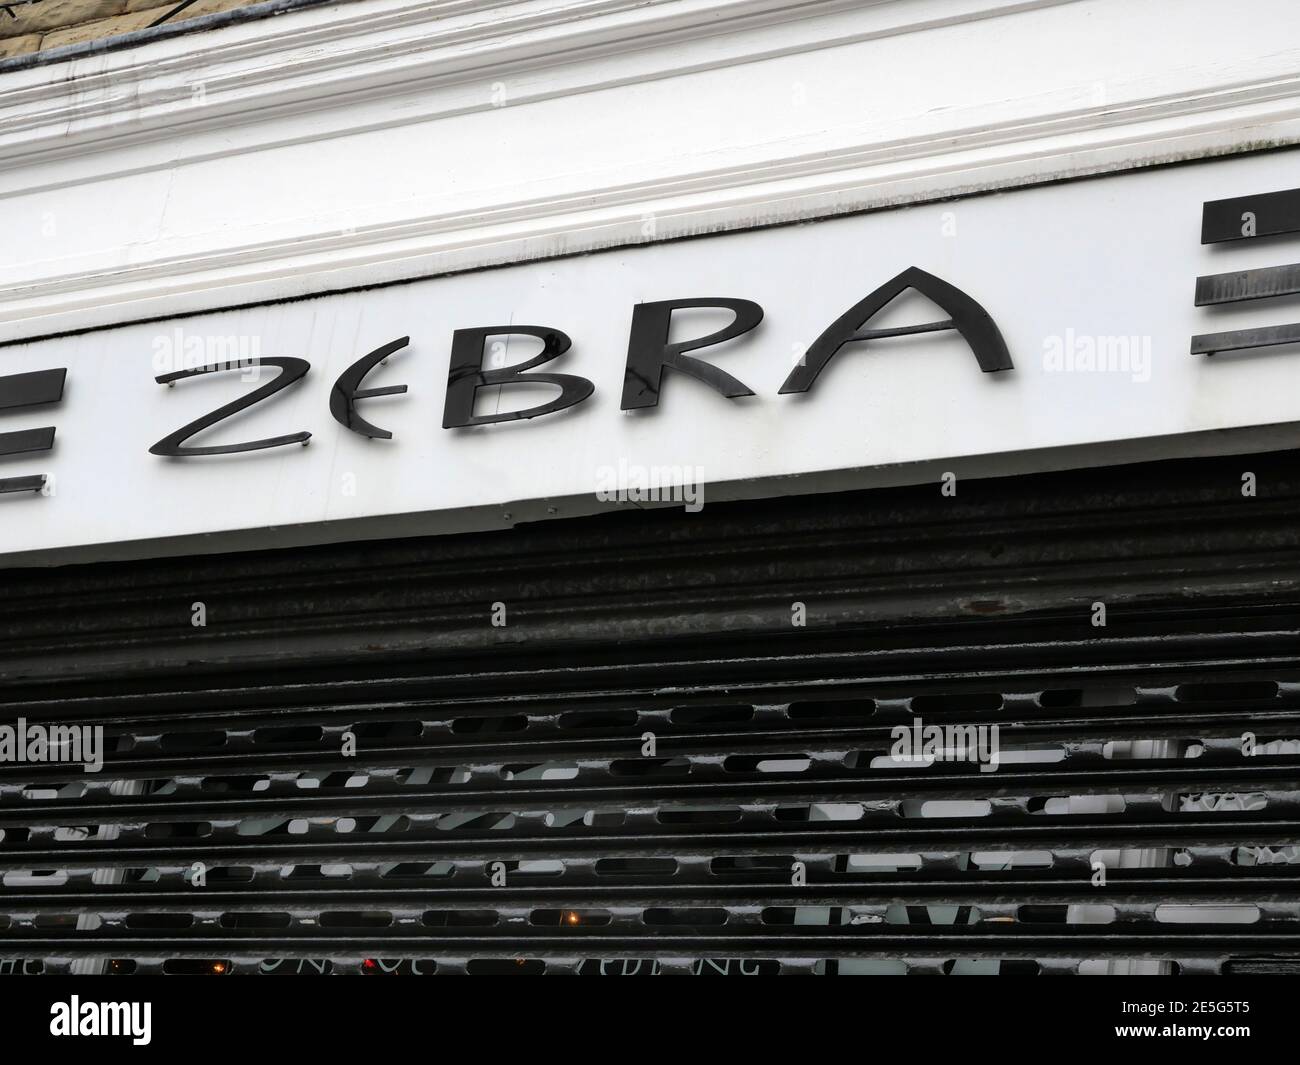 Zebra sign on shop front black letters on white background over black shutters Stock Photo